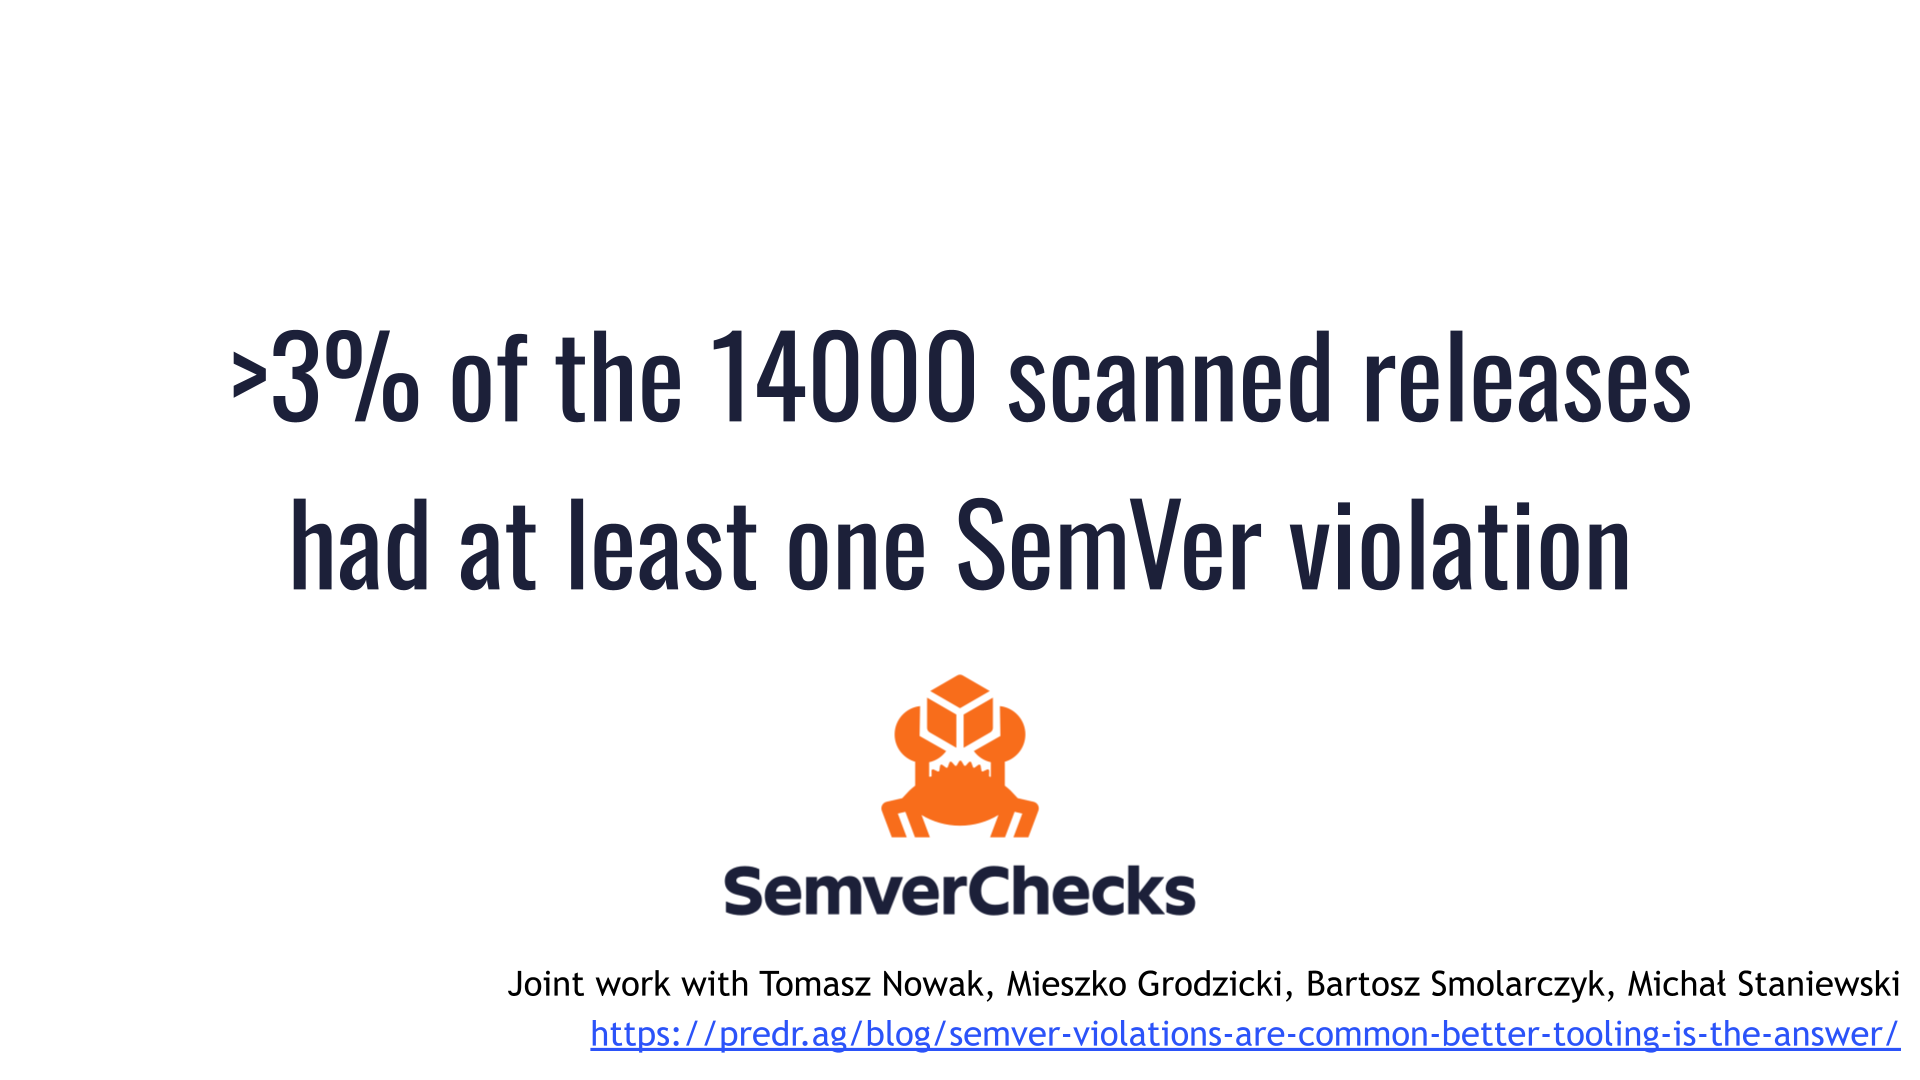 "Over 3% of the 14000 scanned releases had at least one SemVer violation," in large text above the cargo-semver-checks logo. The bottom of the slide says: "Joint work with Tomasz Nowak, Mieszko Grodzicki, Bartosz Smolarczyk, Michał Staniewski"